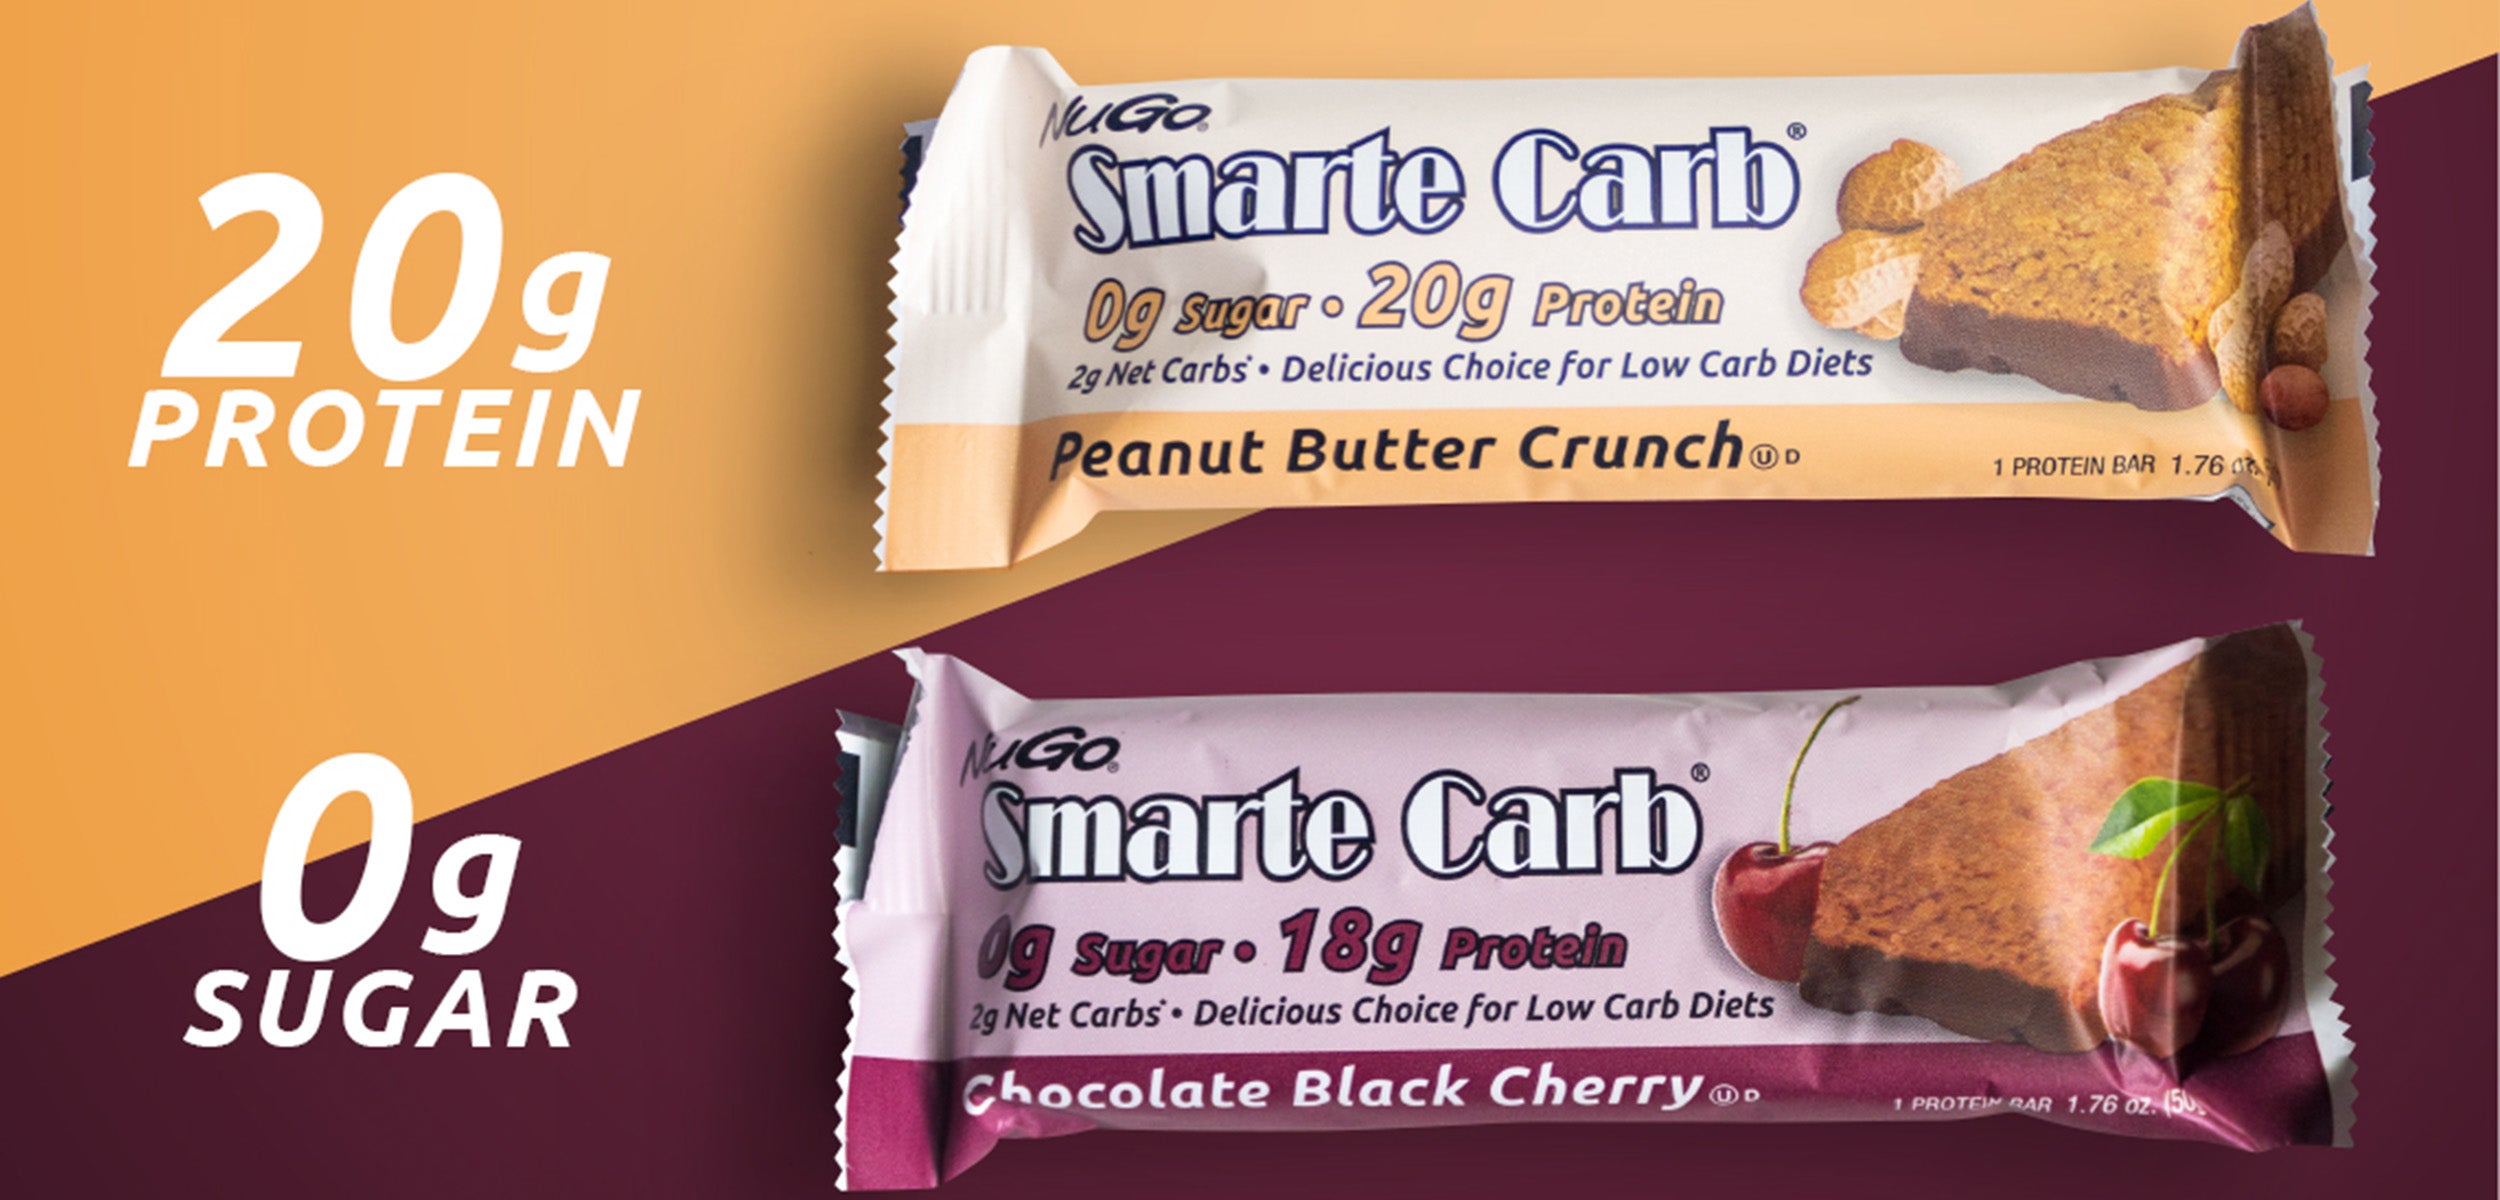 2 Flavors of Smarte Carb next to text 20g Protein and 0g Sugar